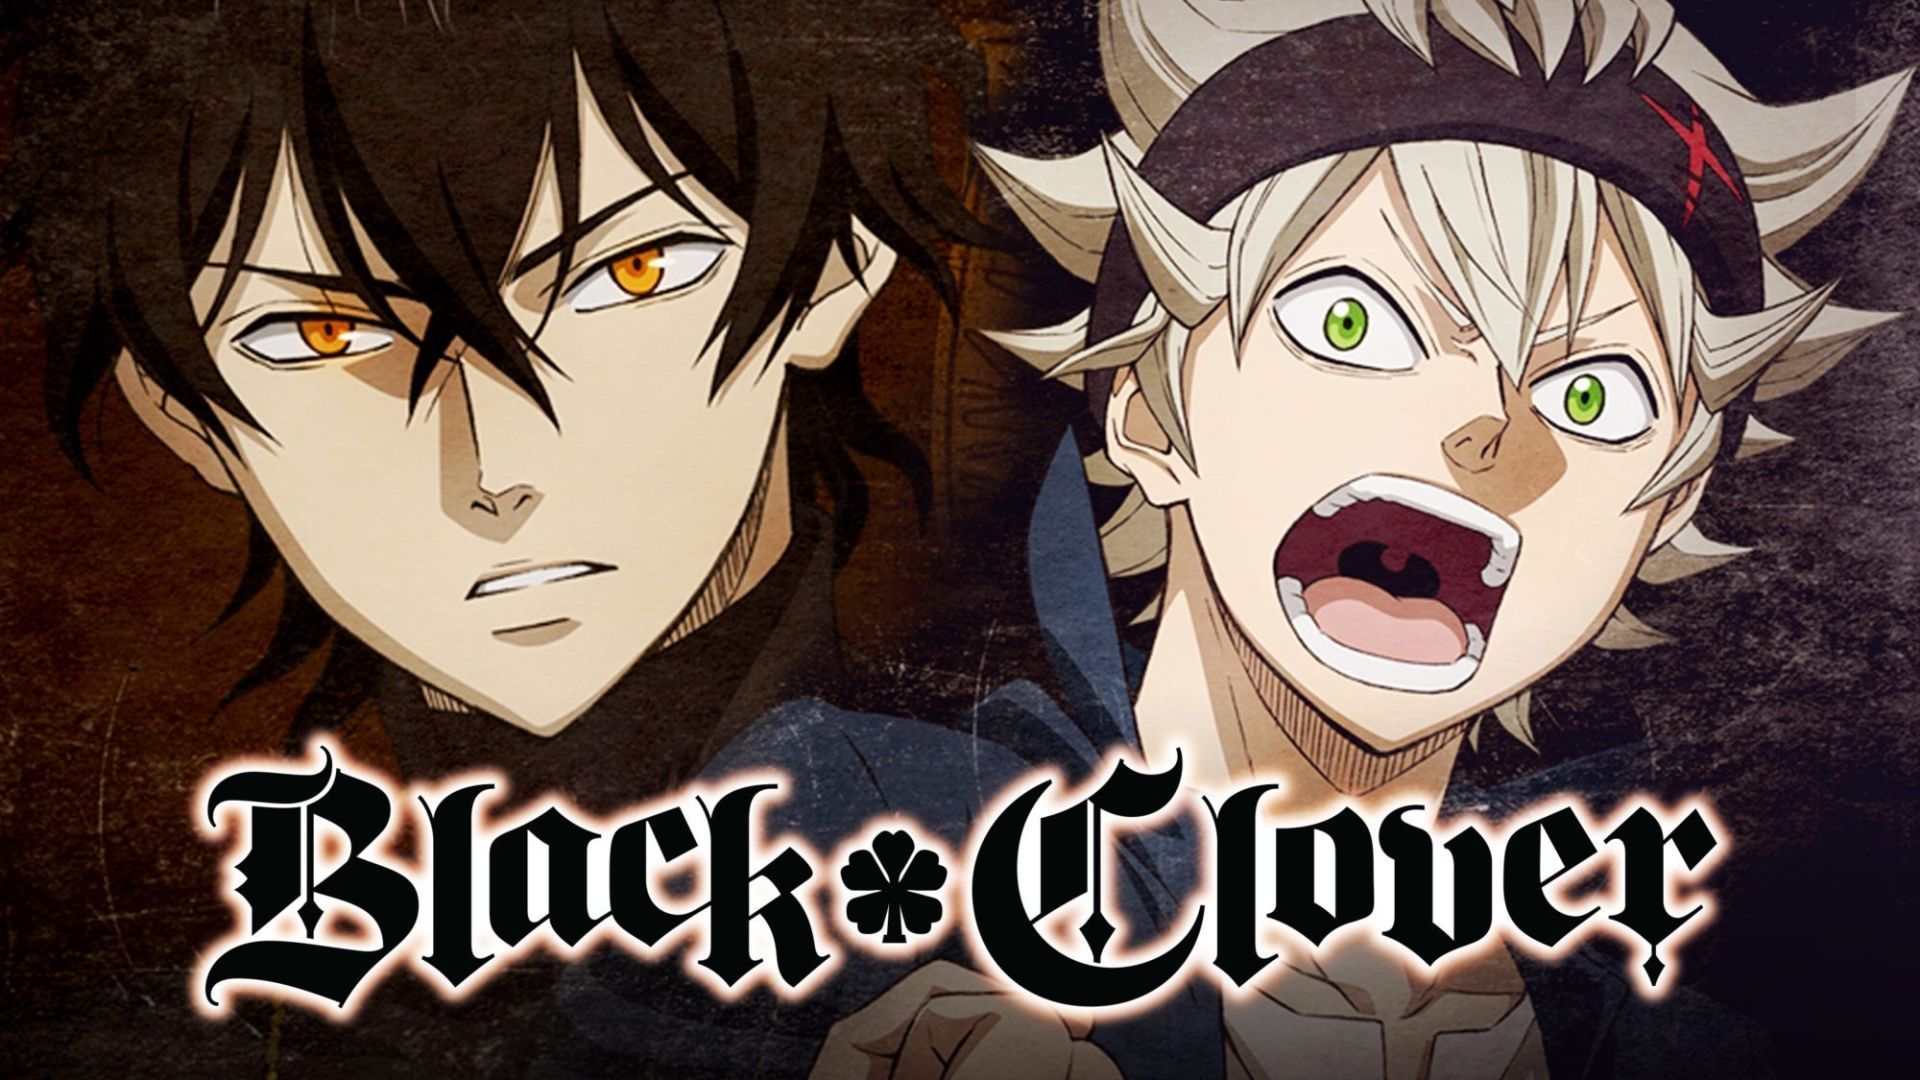 Black Clover Chapter 239 Release Date, Plot Spoilers: Asta will